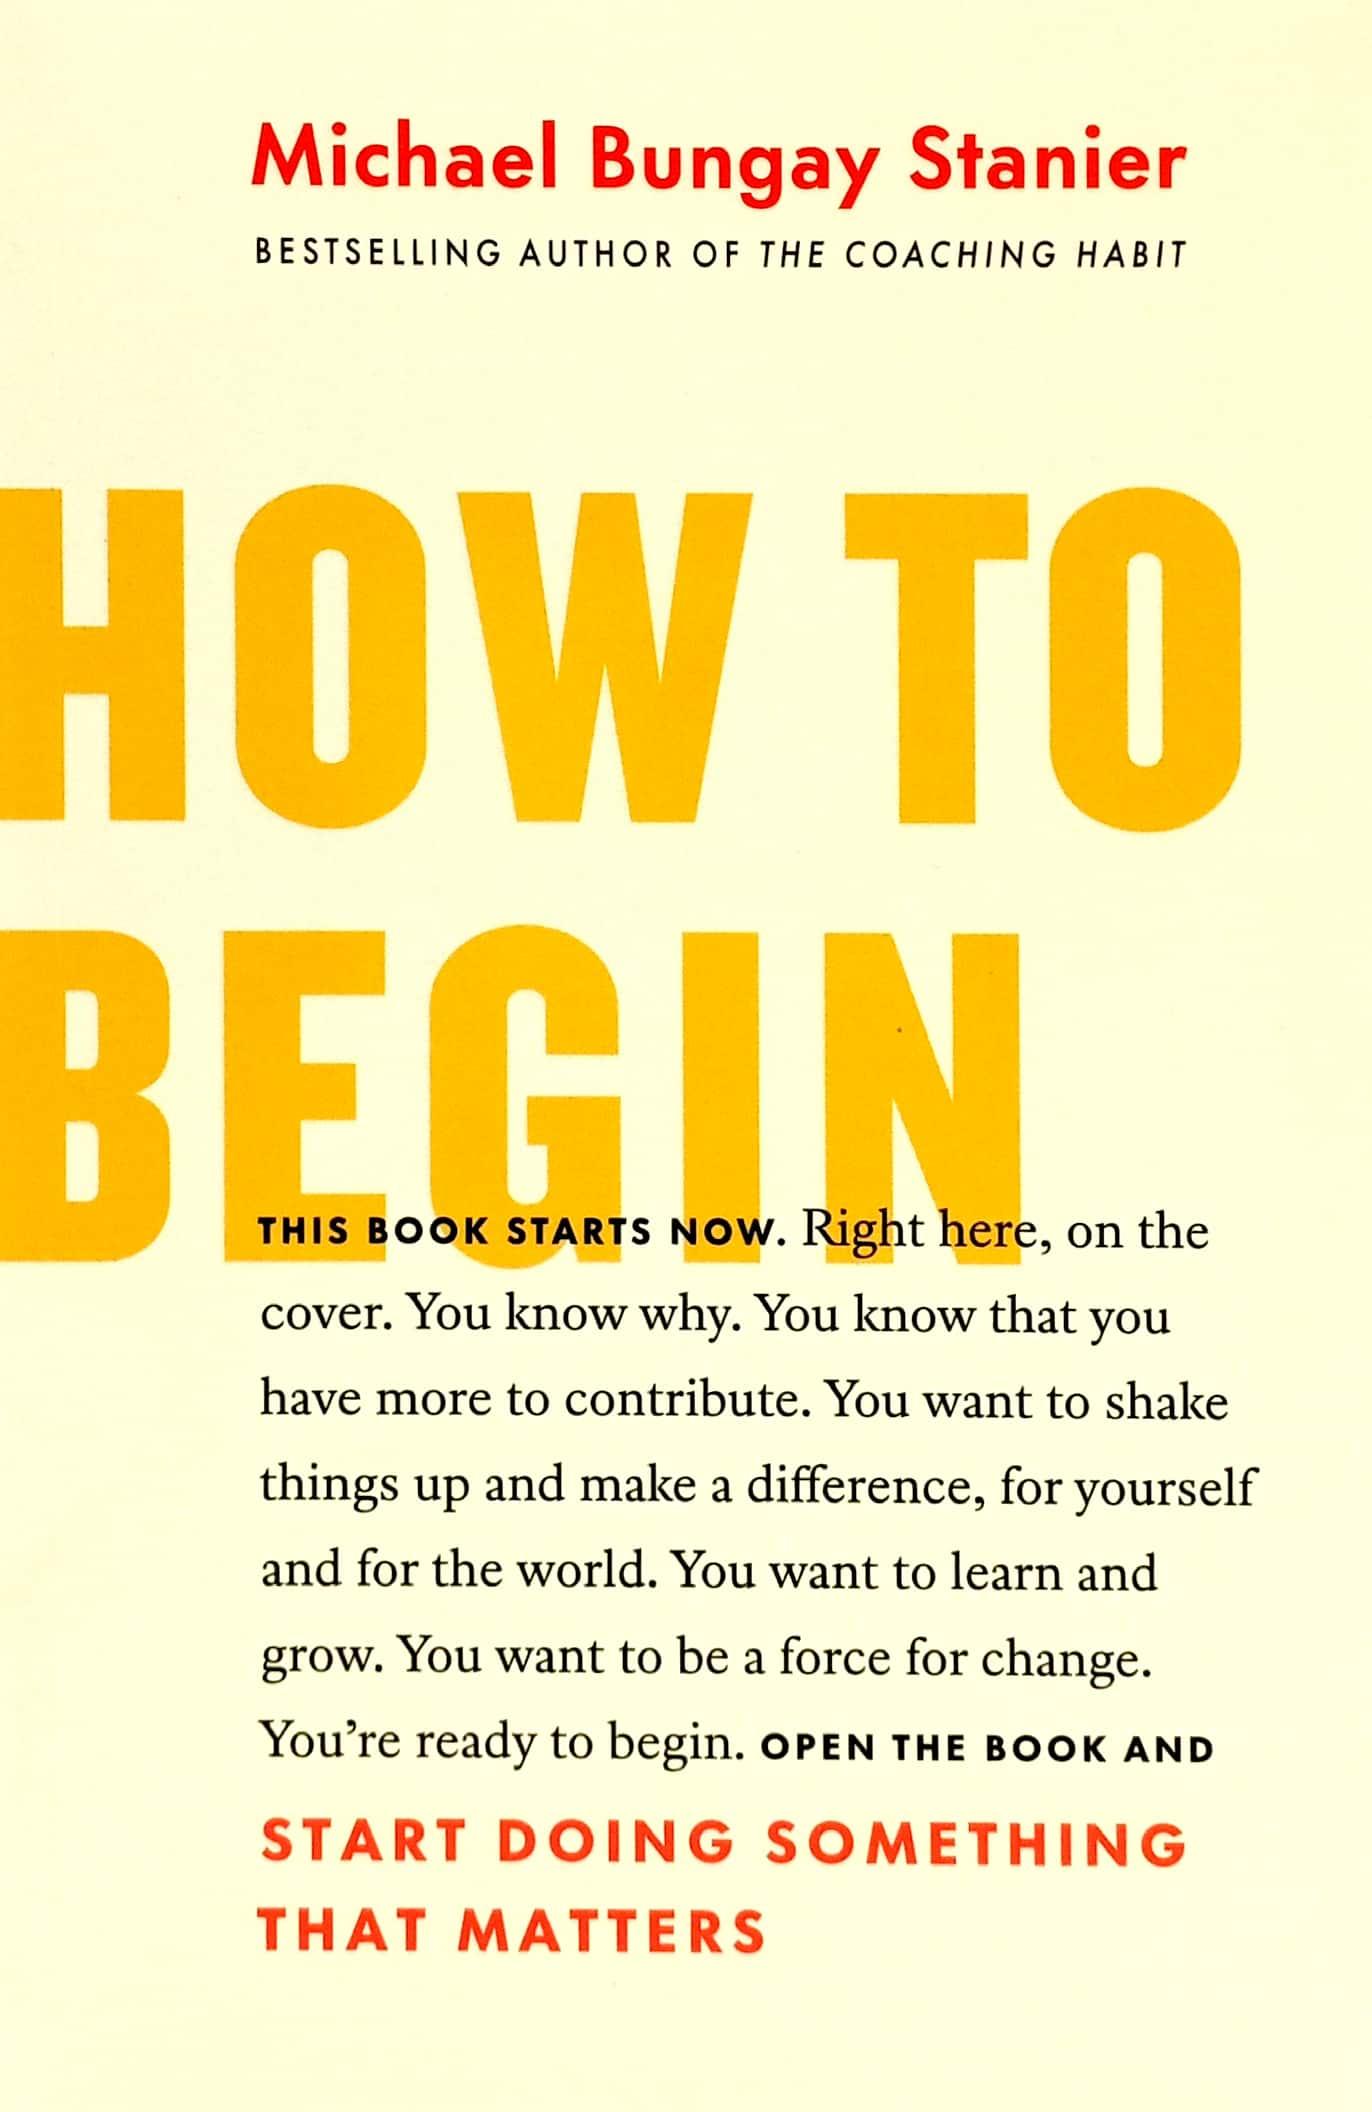 How To Begin: Start Doing Something That Matters